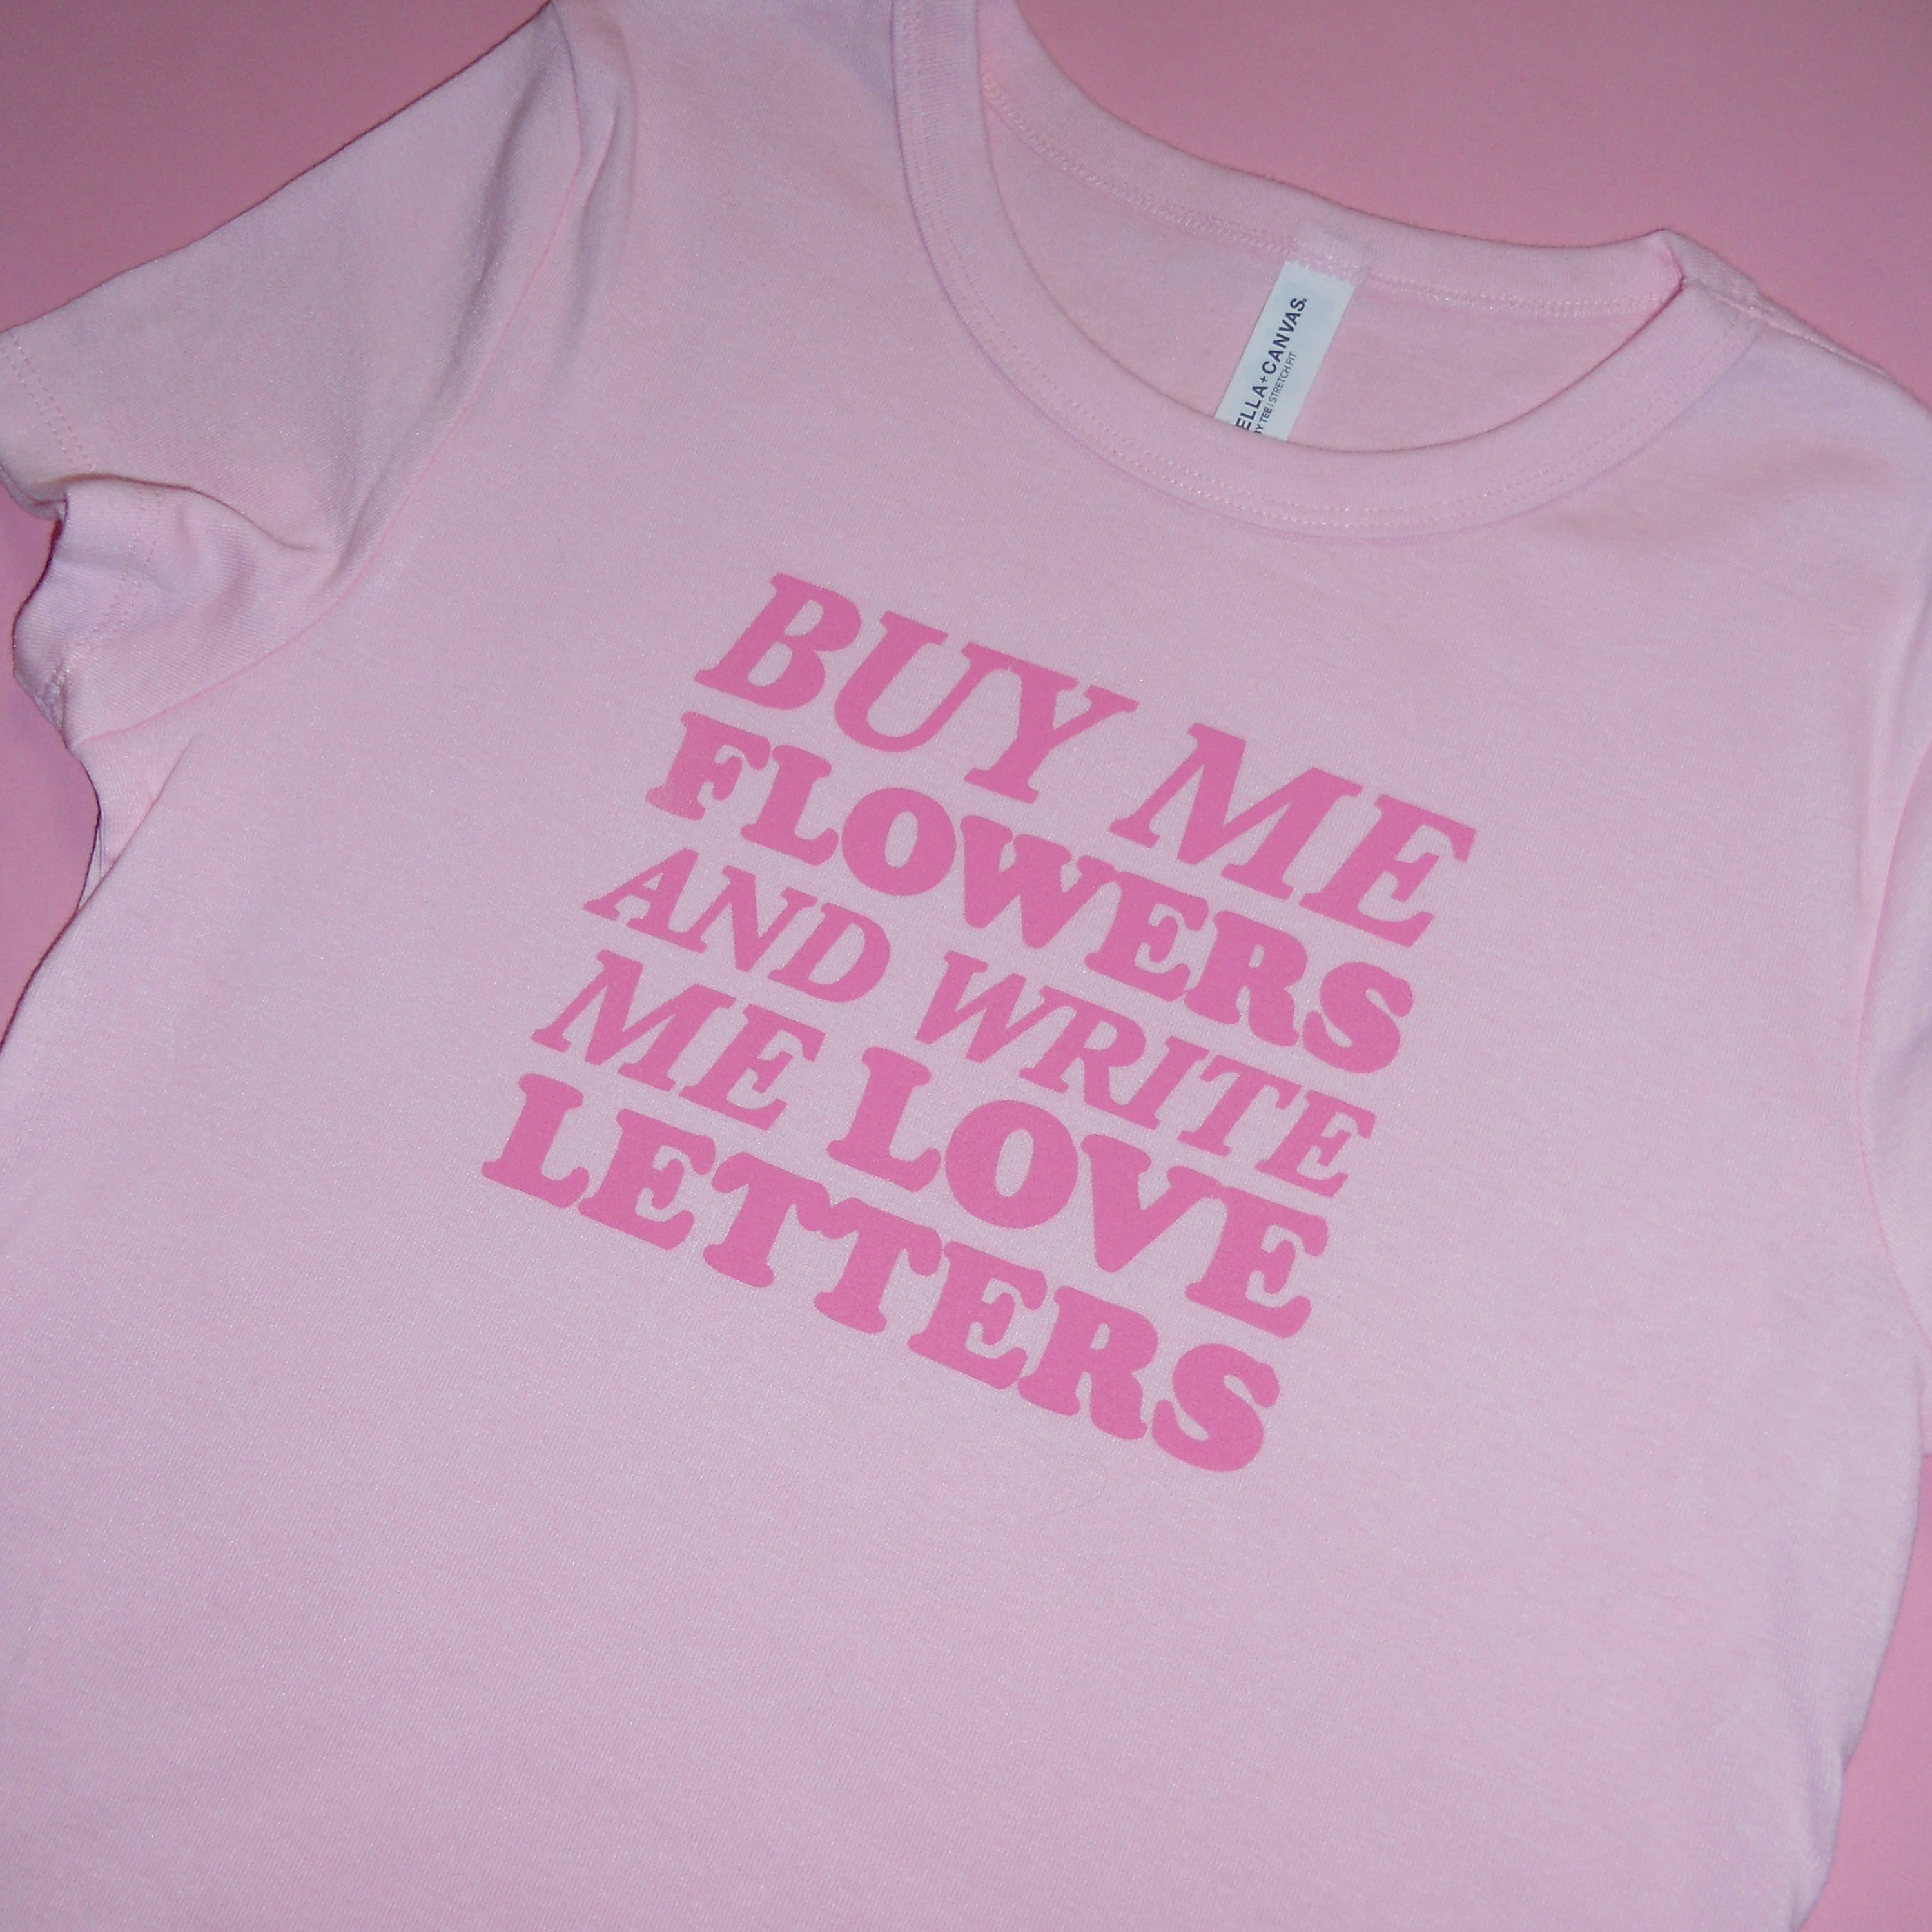 BUY ME FLOWERS AND WRITE ME LOVE LETTERS baby tee